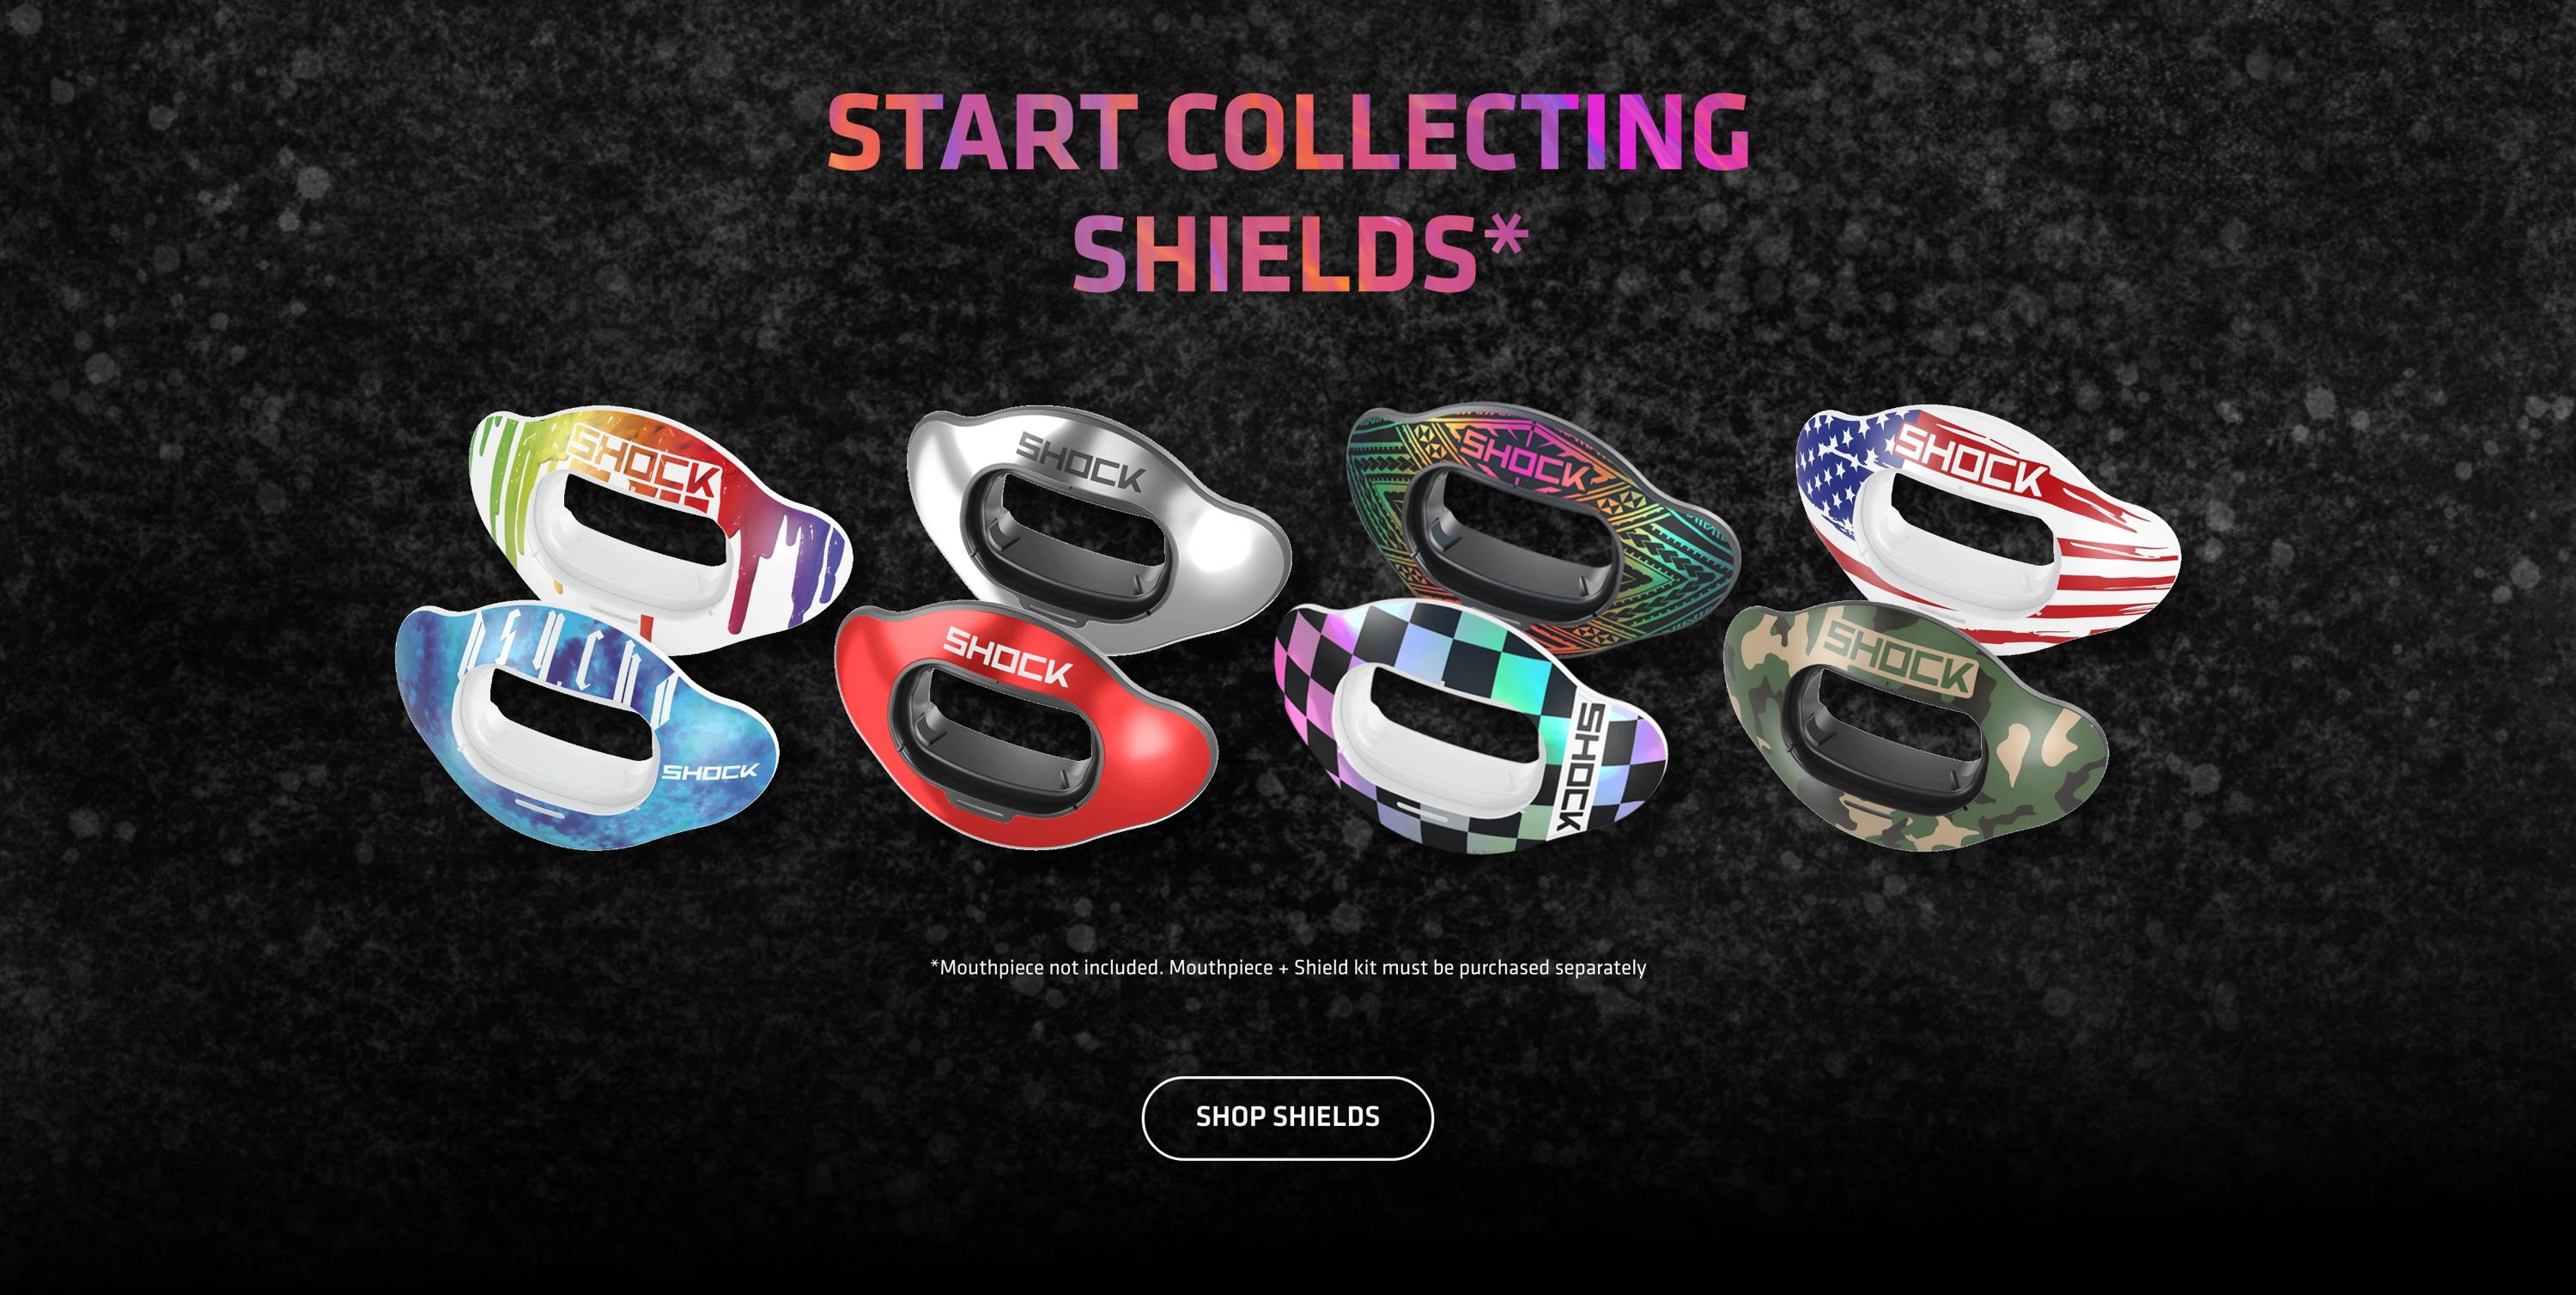 Start collecting shields* Mouthpiece not included. Mouthpiece + Shield kit must be purchased separately. Shop Shields.